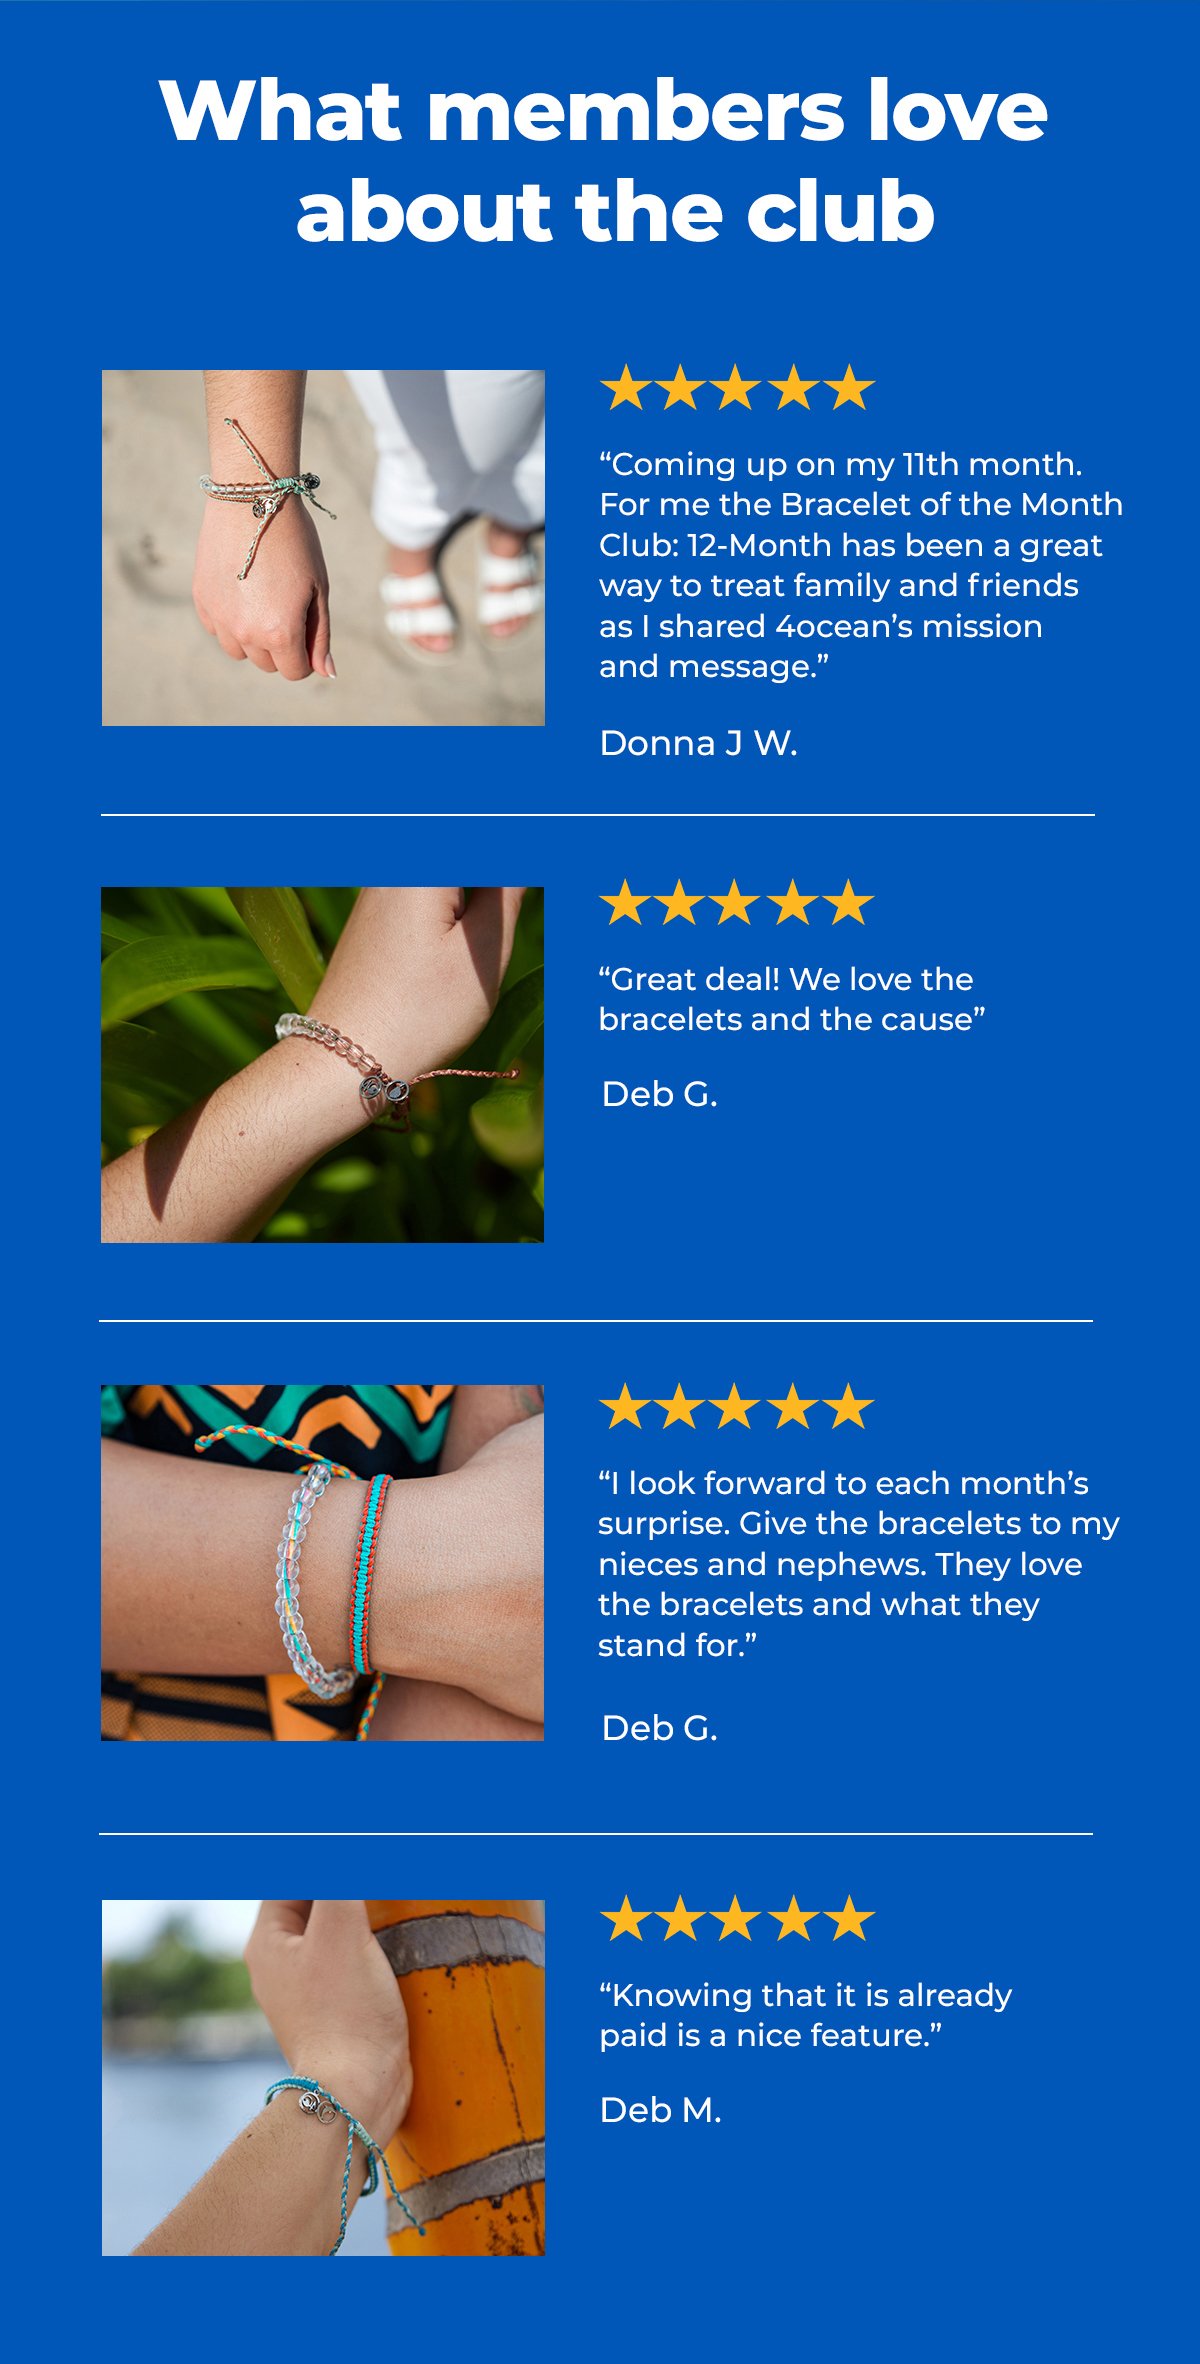 What members love about the club “Coming up on my 11th month. For me the Bracelet of the Month Club: 12-Month has been a great way to treat family and friends as I shared 4ocean’s mission and message.” Donna J W.